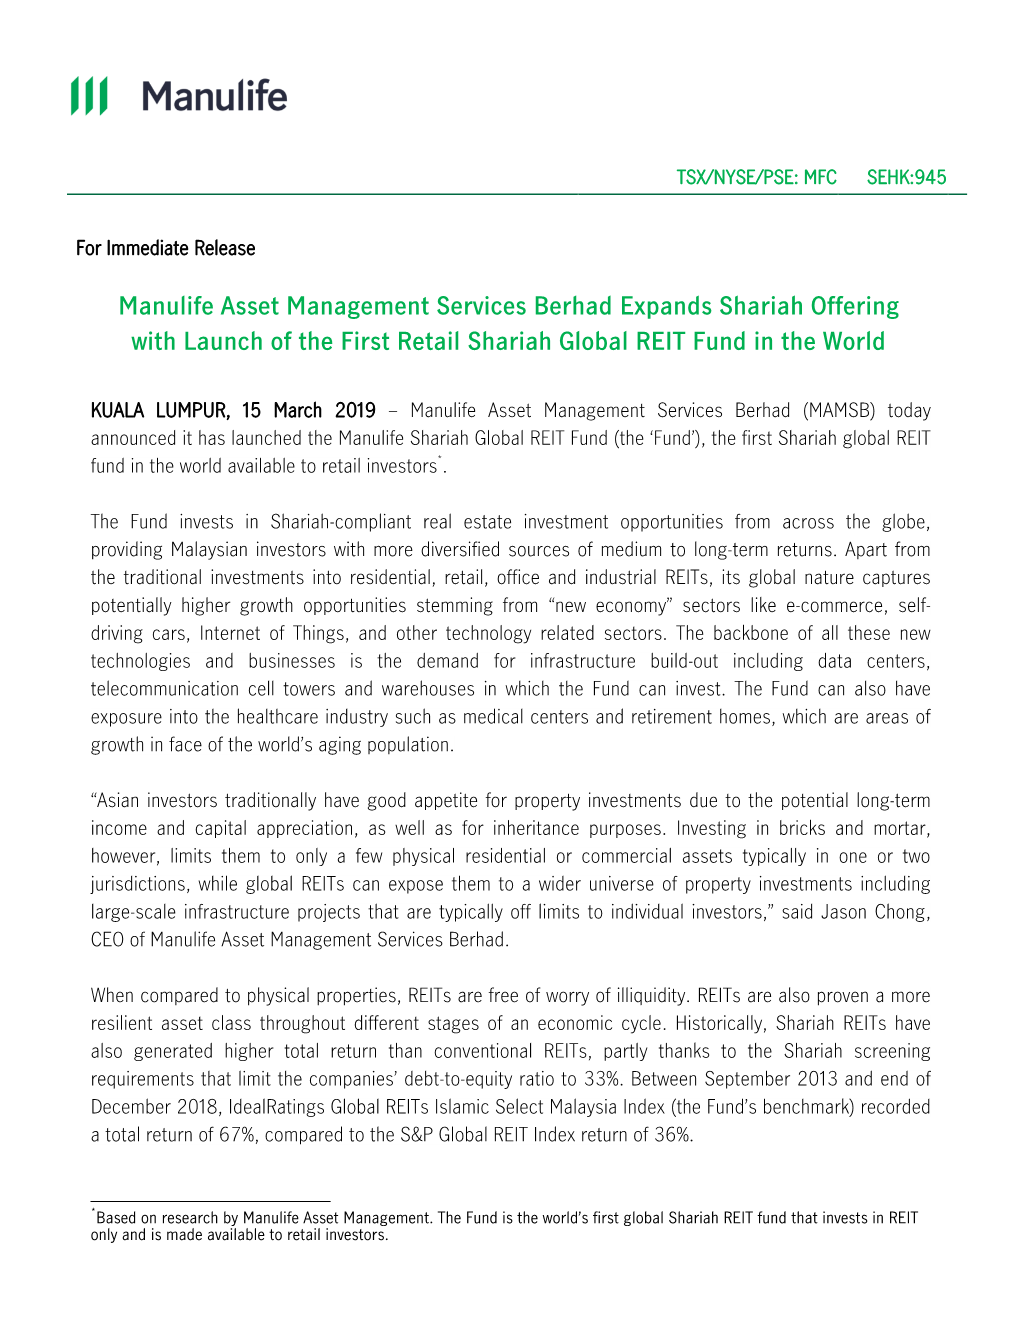 Manulife Asset Management Services Berhad Expands Shariah Offering with Launch of the First Retail Shariah Global REIT Fund in the World